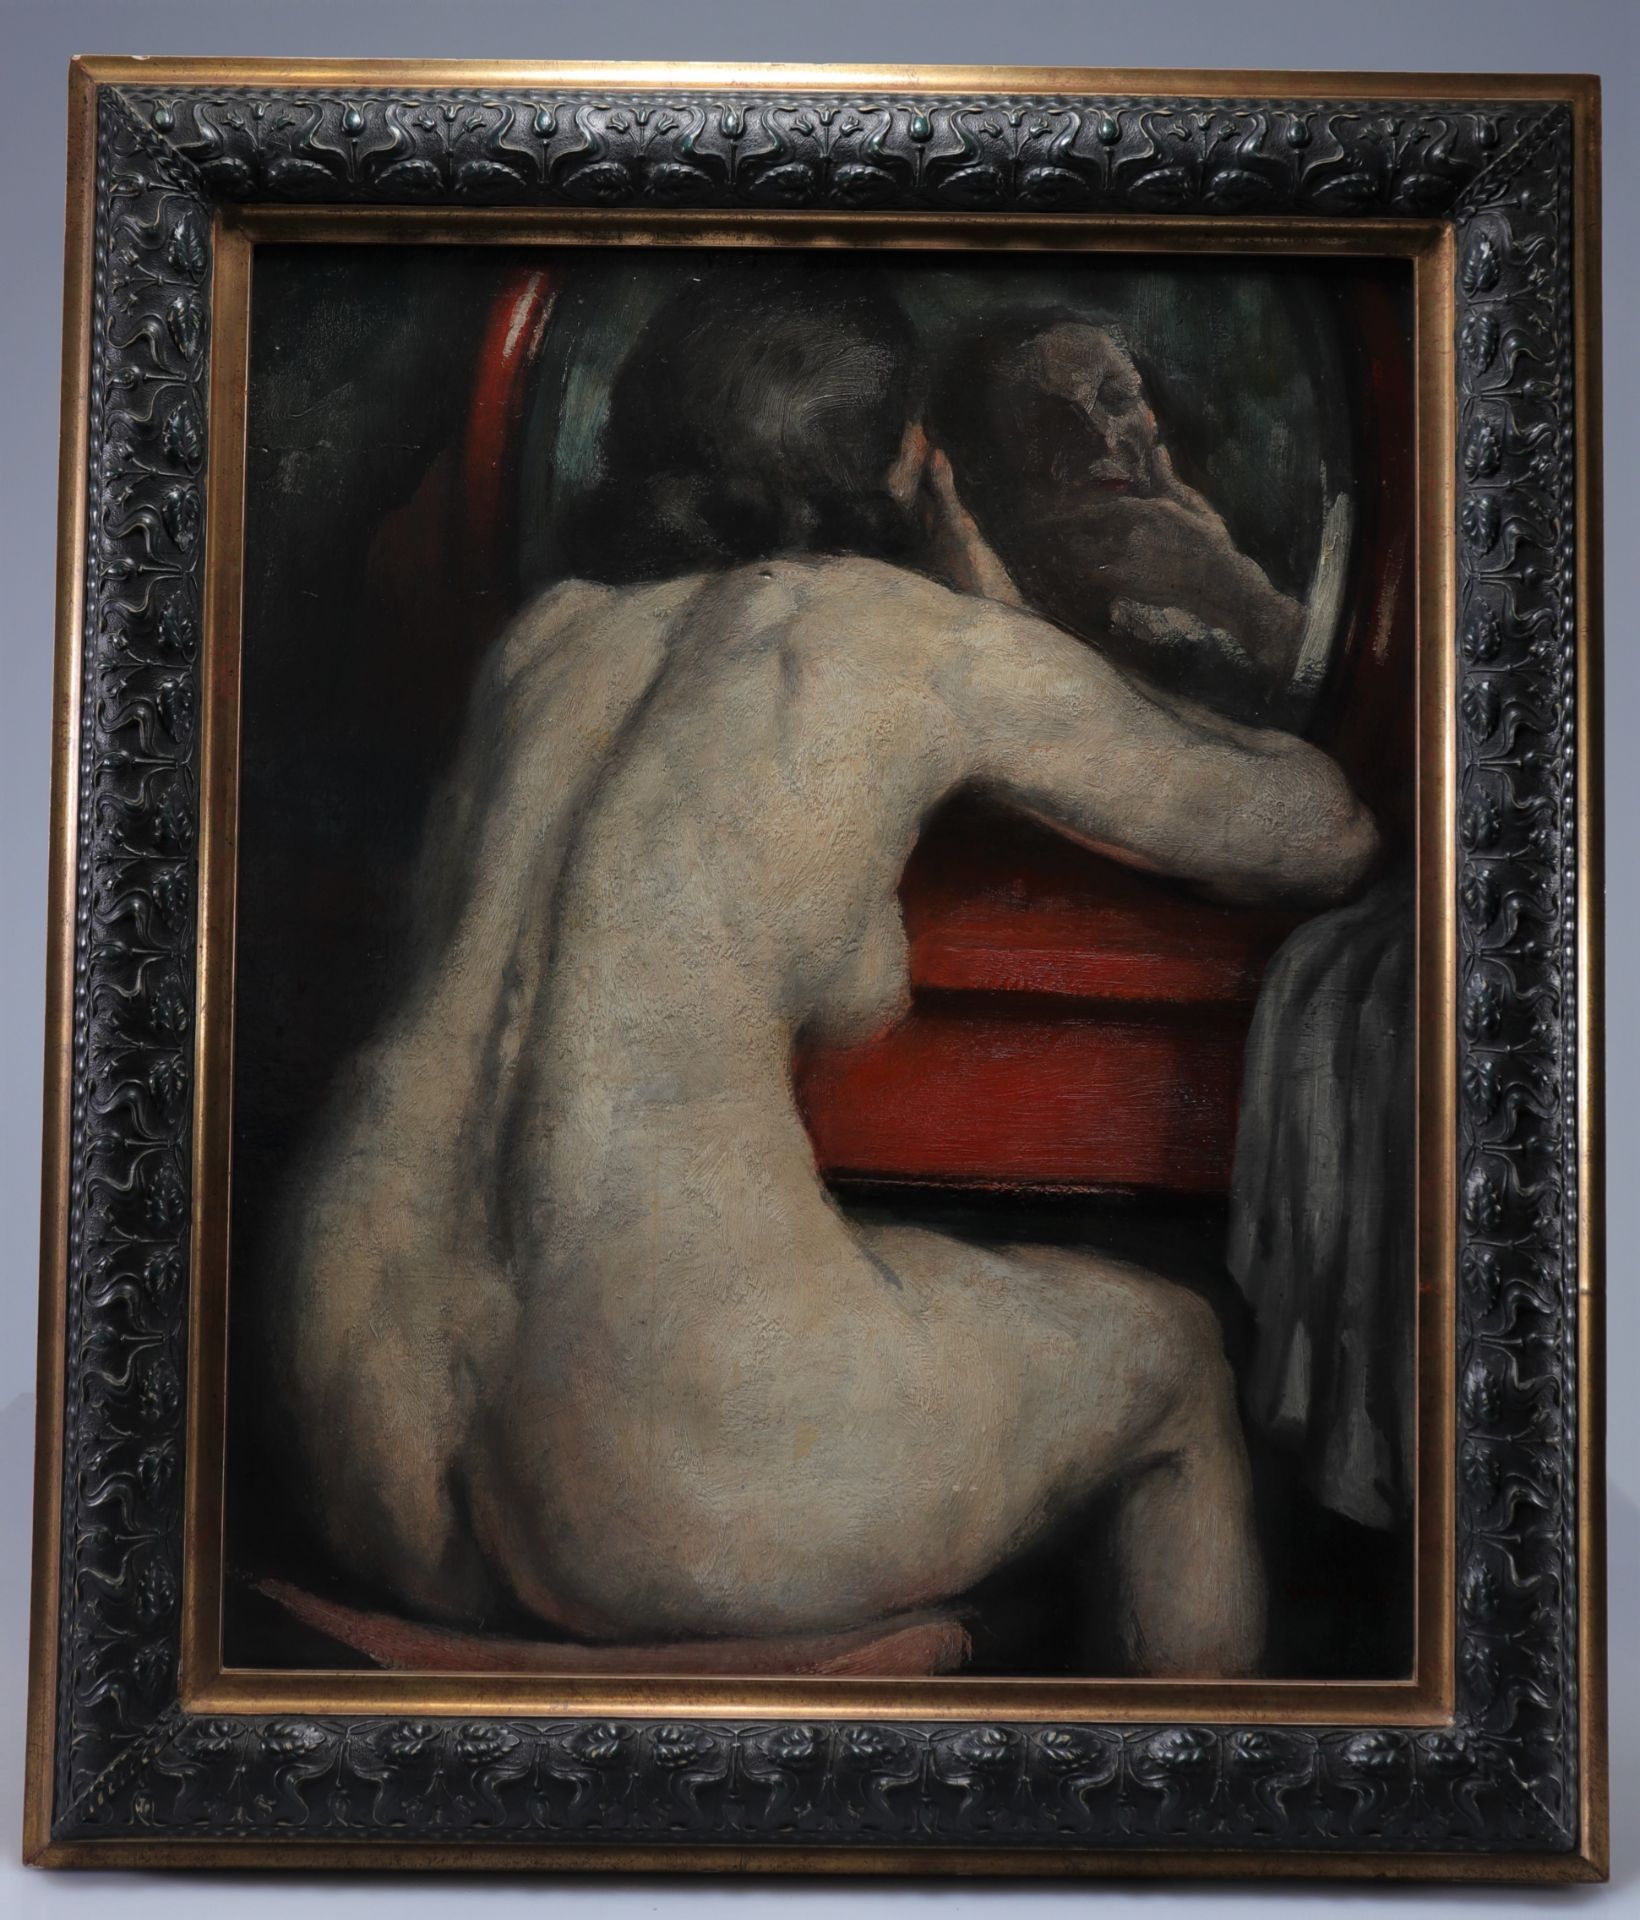 Armand RASSENFOSSE (1862-1934) Oil on canvas "young naked woman from behind" dated 1926 - Image 2 of 3